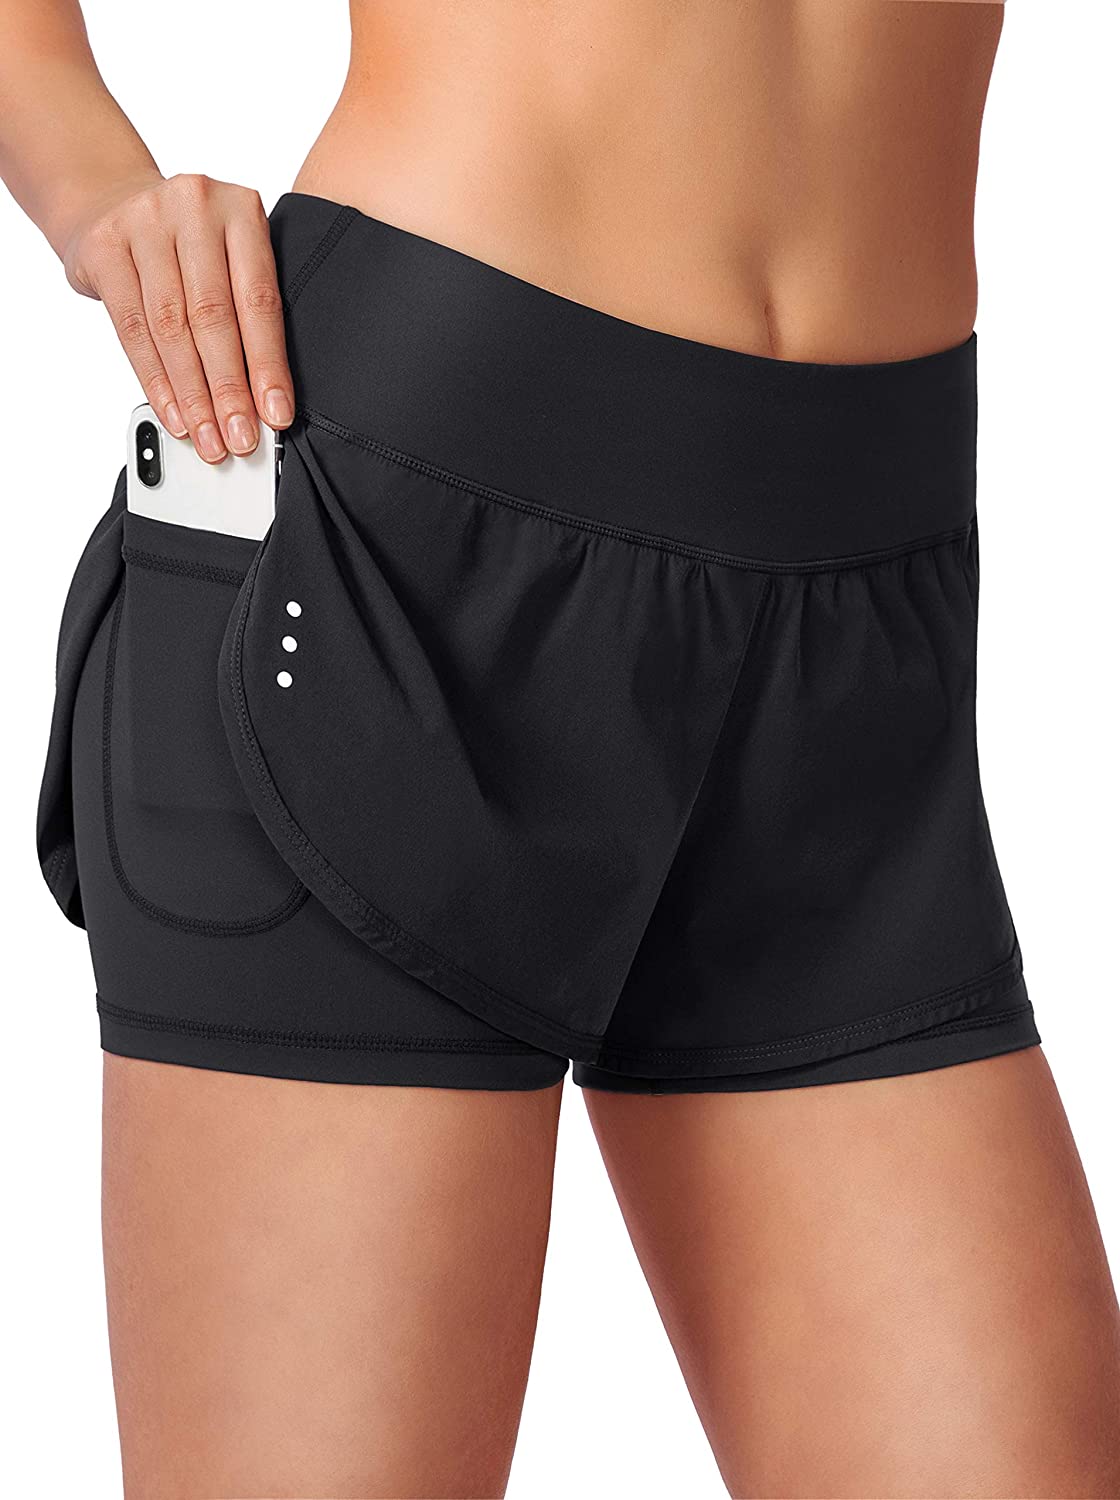 JANSION Women Workout Running Shorts 2 in 1 Athletic Yoga Gym Sport Shorts with Pockets 